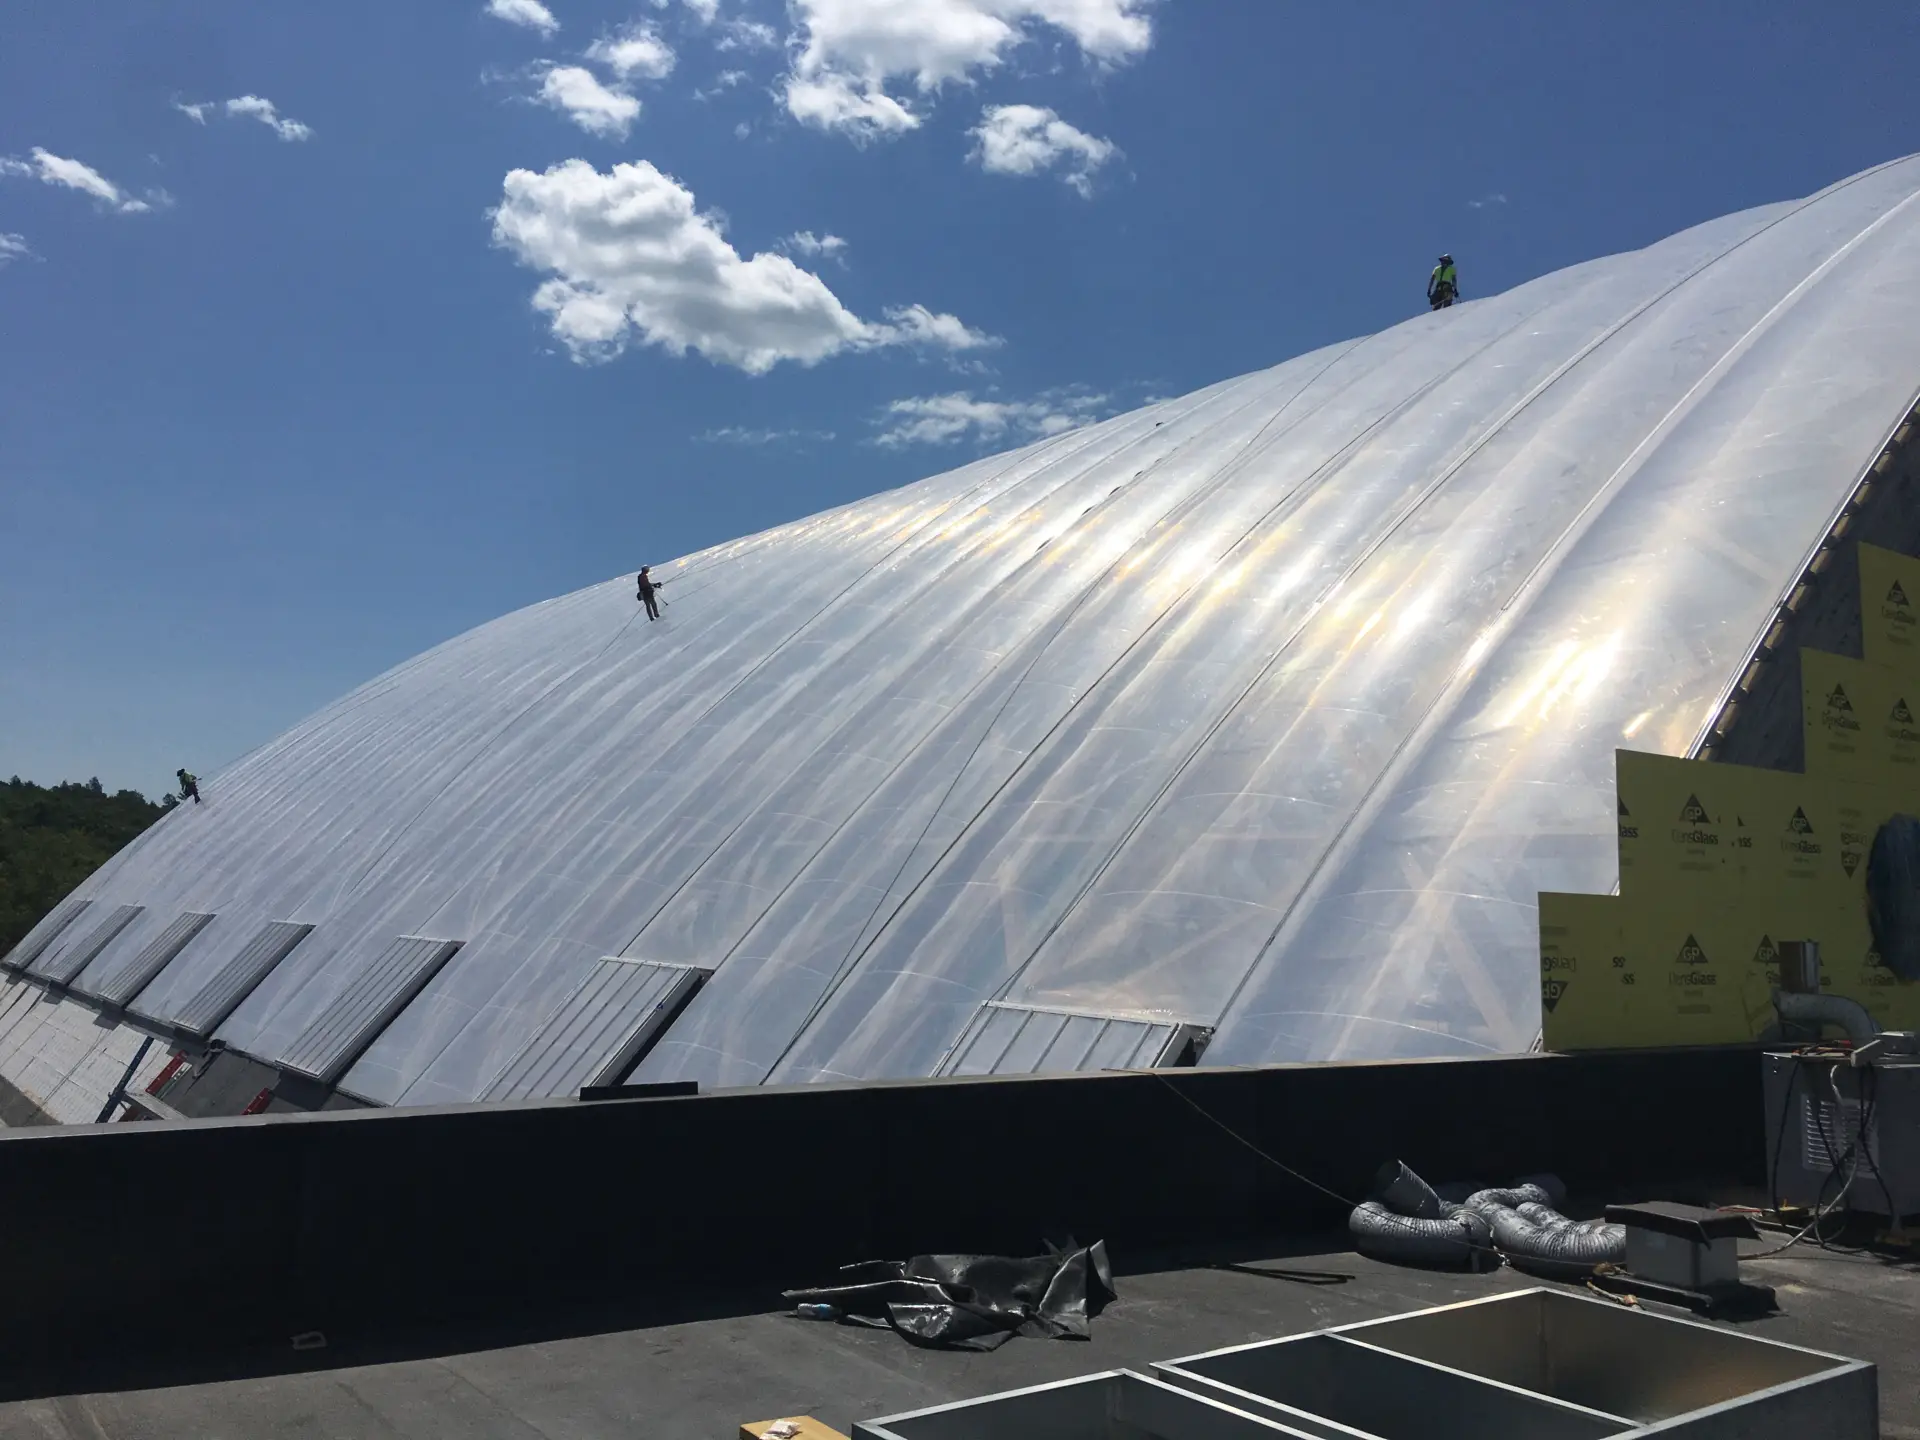 One of our installers shows the magnitude of the ETFE cushions enclosing the waterpark.